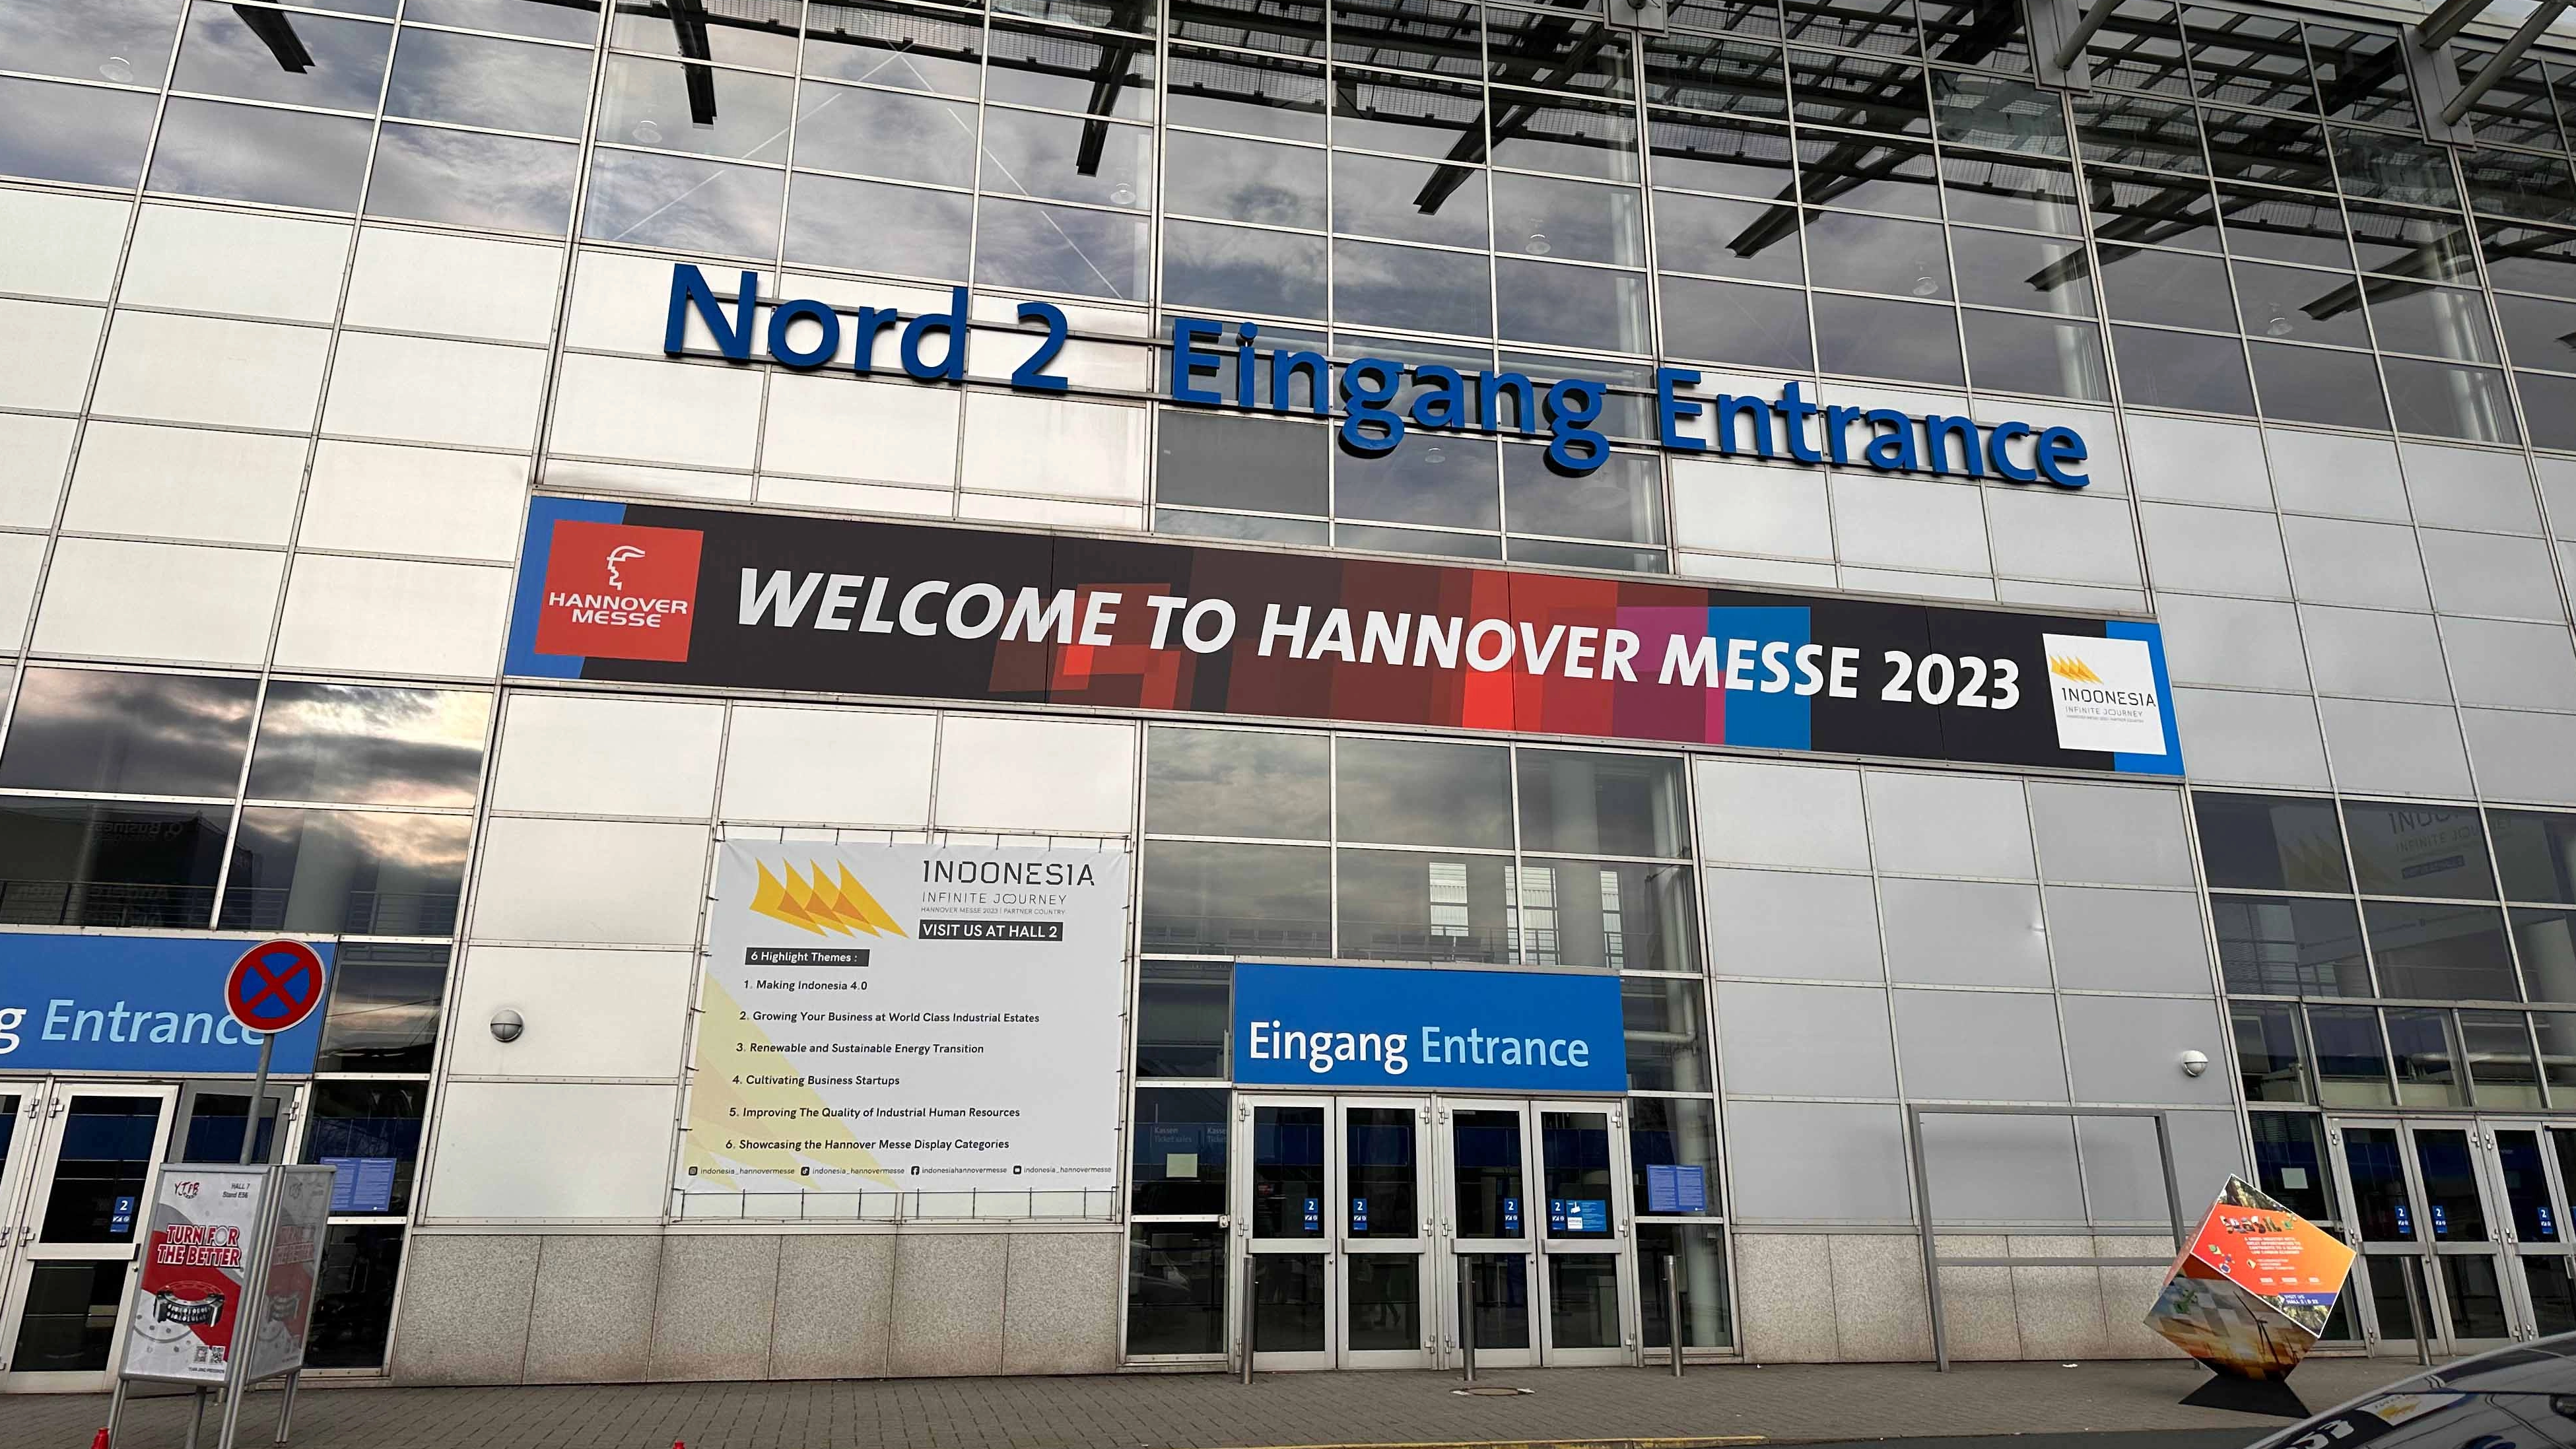  【Exhibition】AiTEN participated in the Hannover Messe in Germany